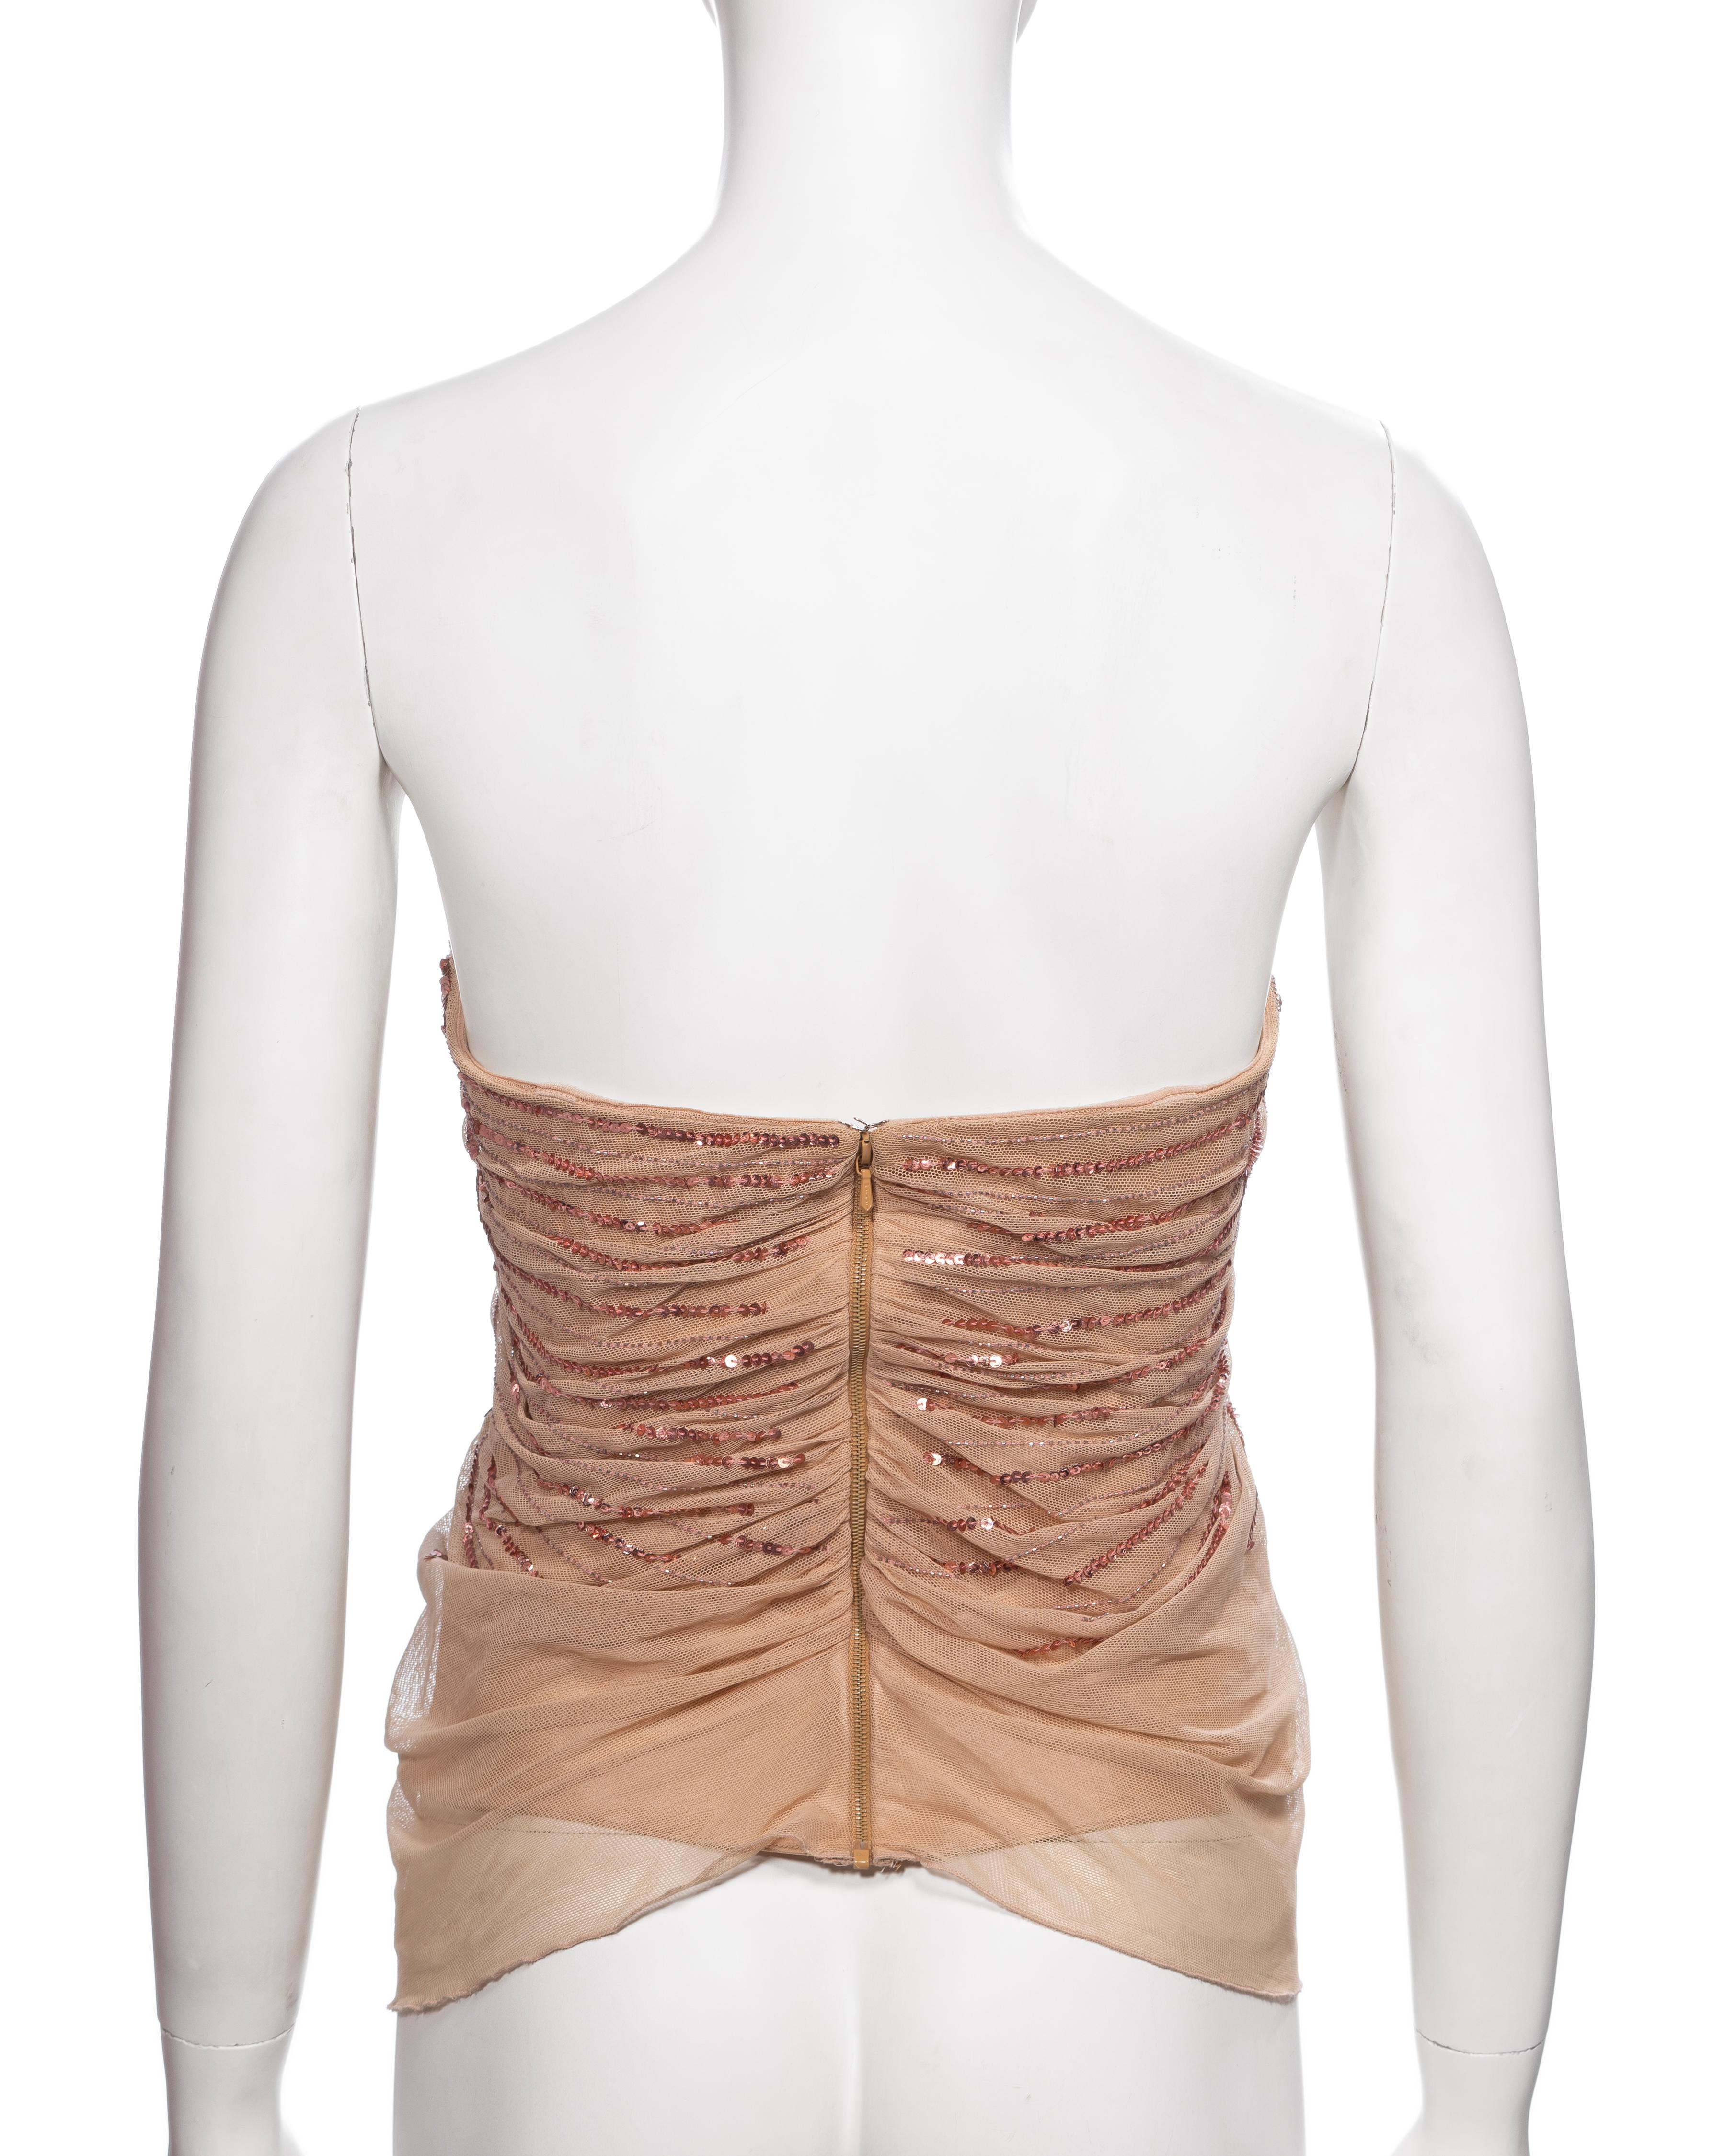 Christian Dior by John Galliano Nude Smocked Mesh and Sequin Corset Top, FW 2005 For Sale 10